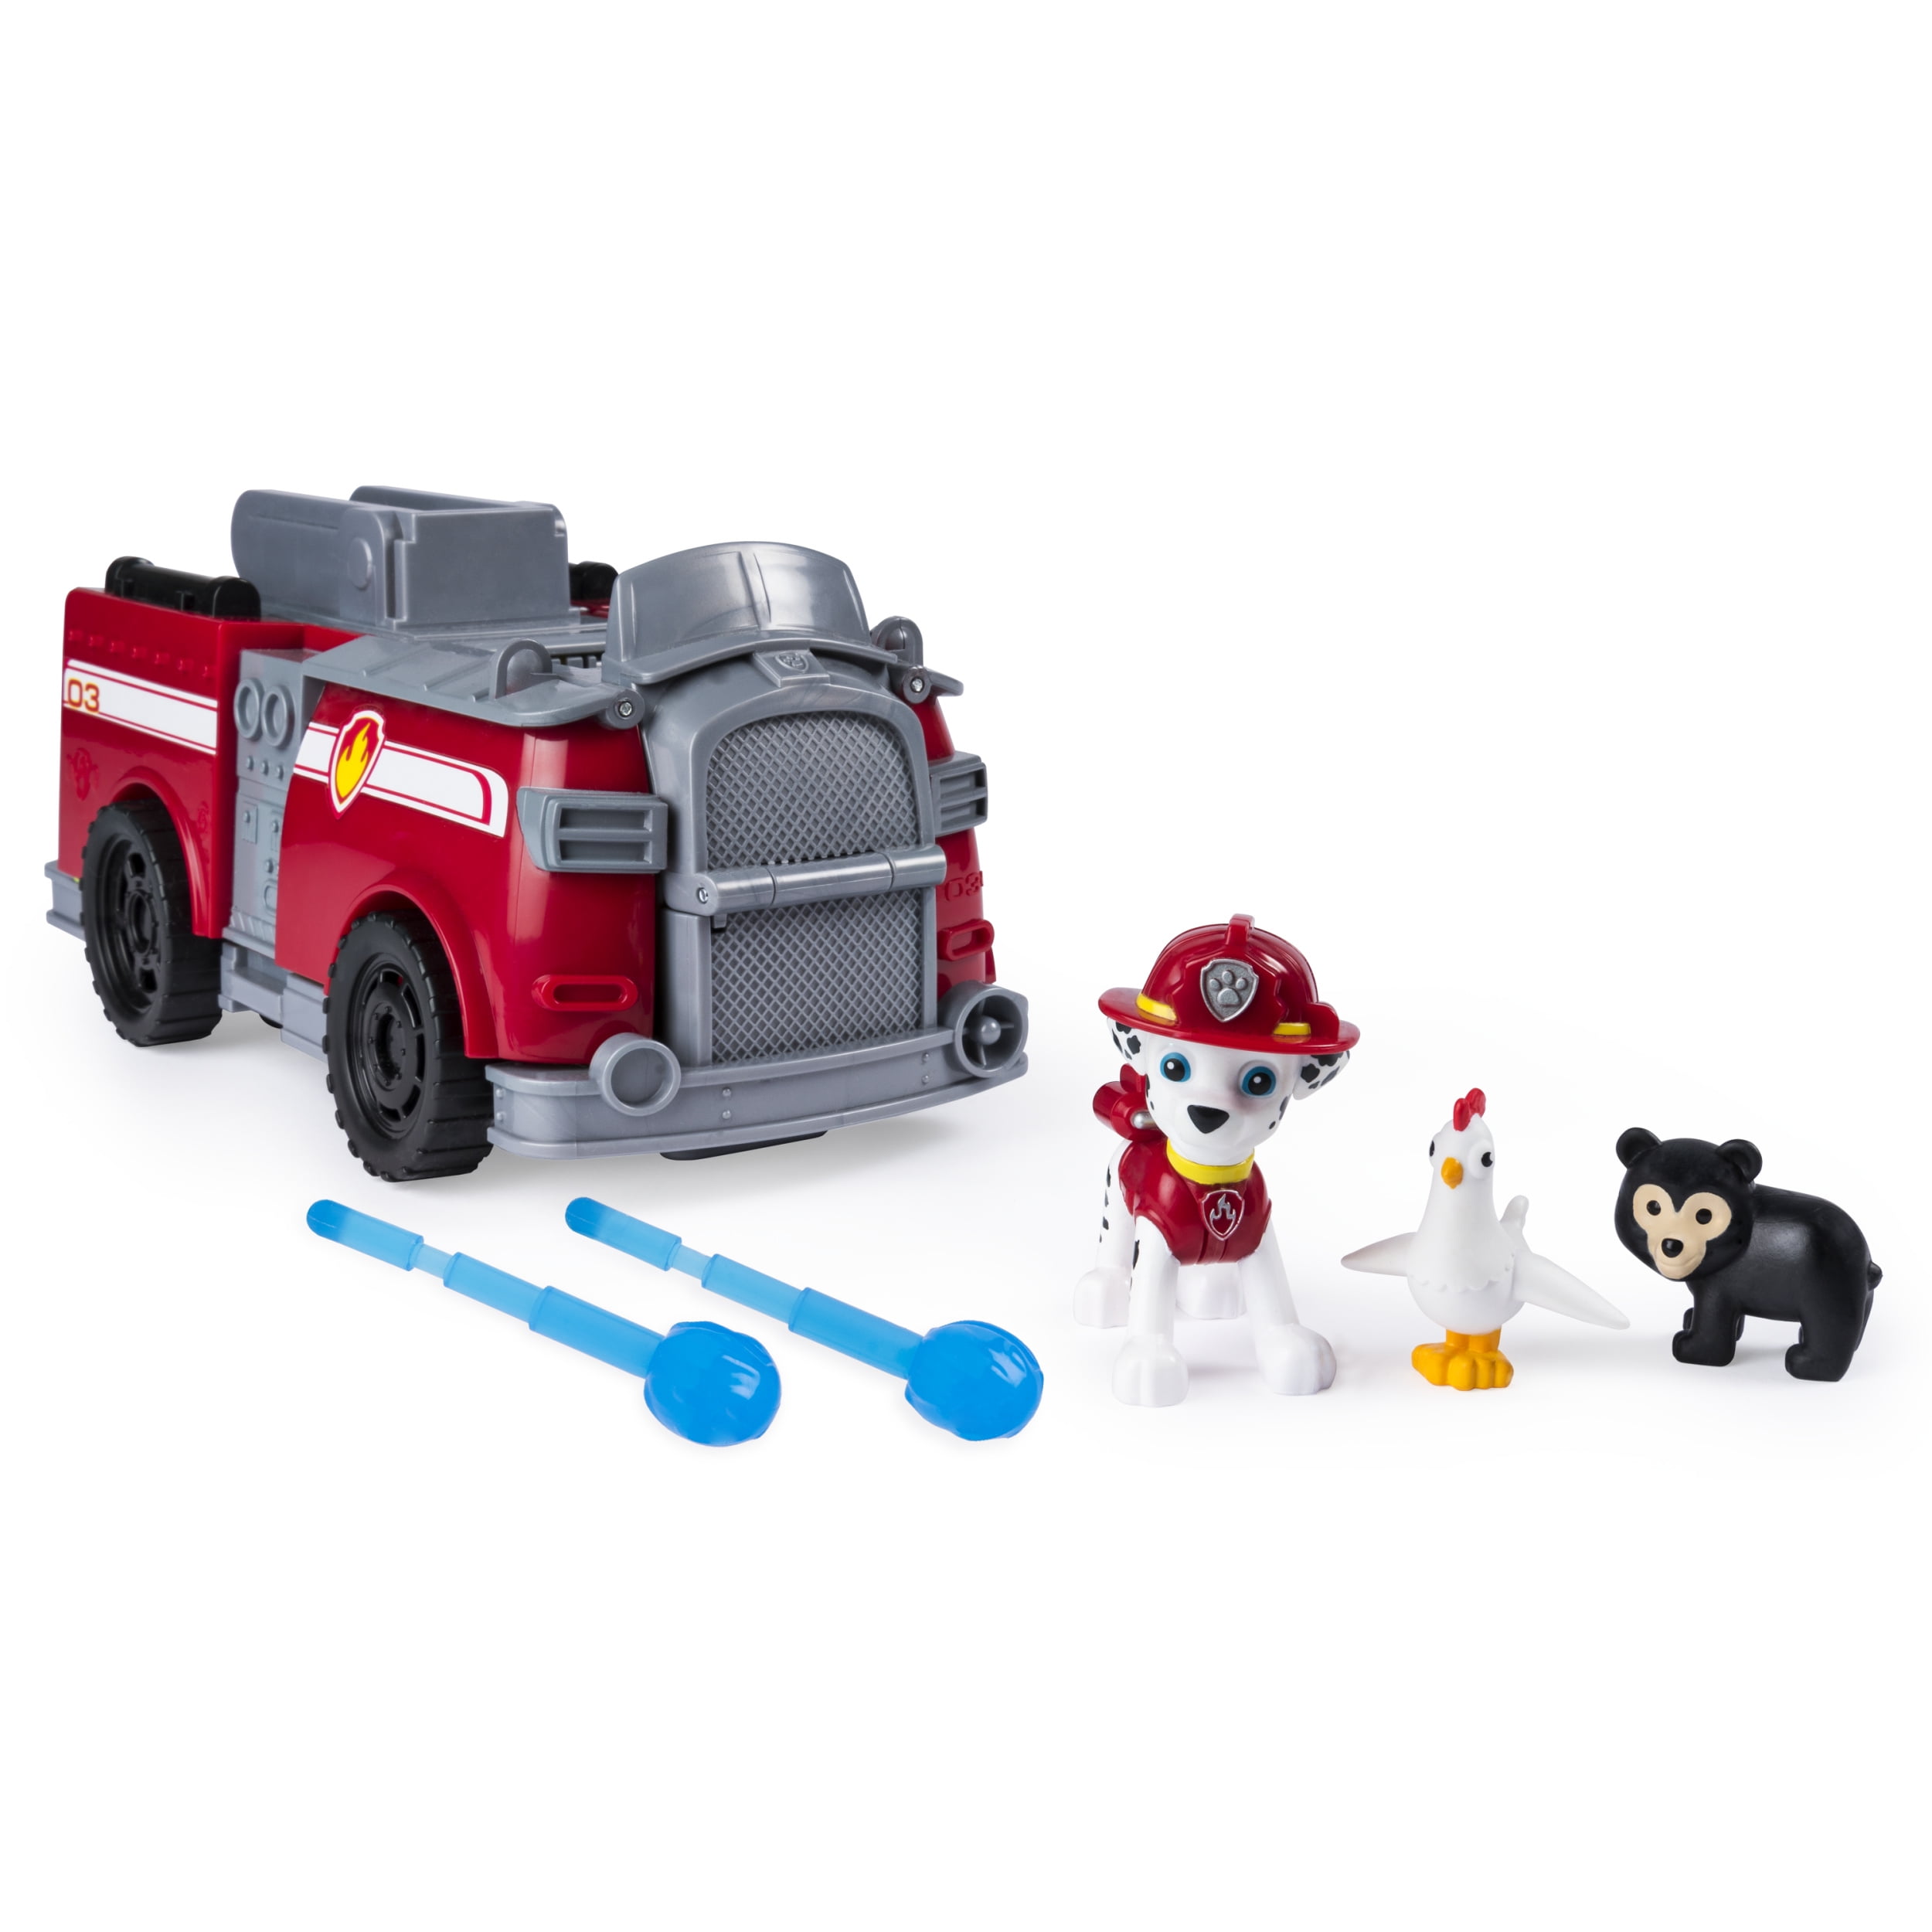 Paw Patrol Skye's Ride N Rescue Transforming Helicopter Vehicle Playset 